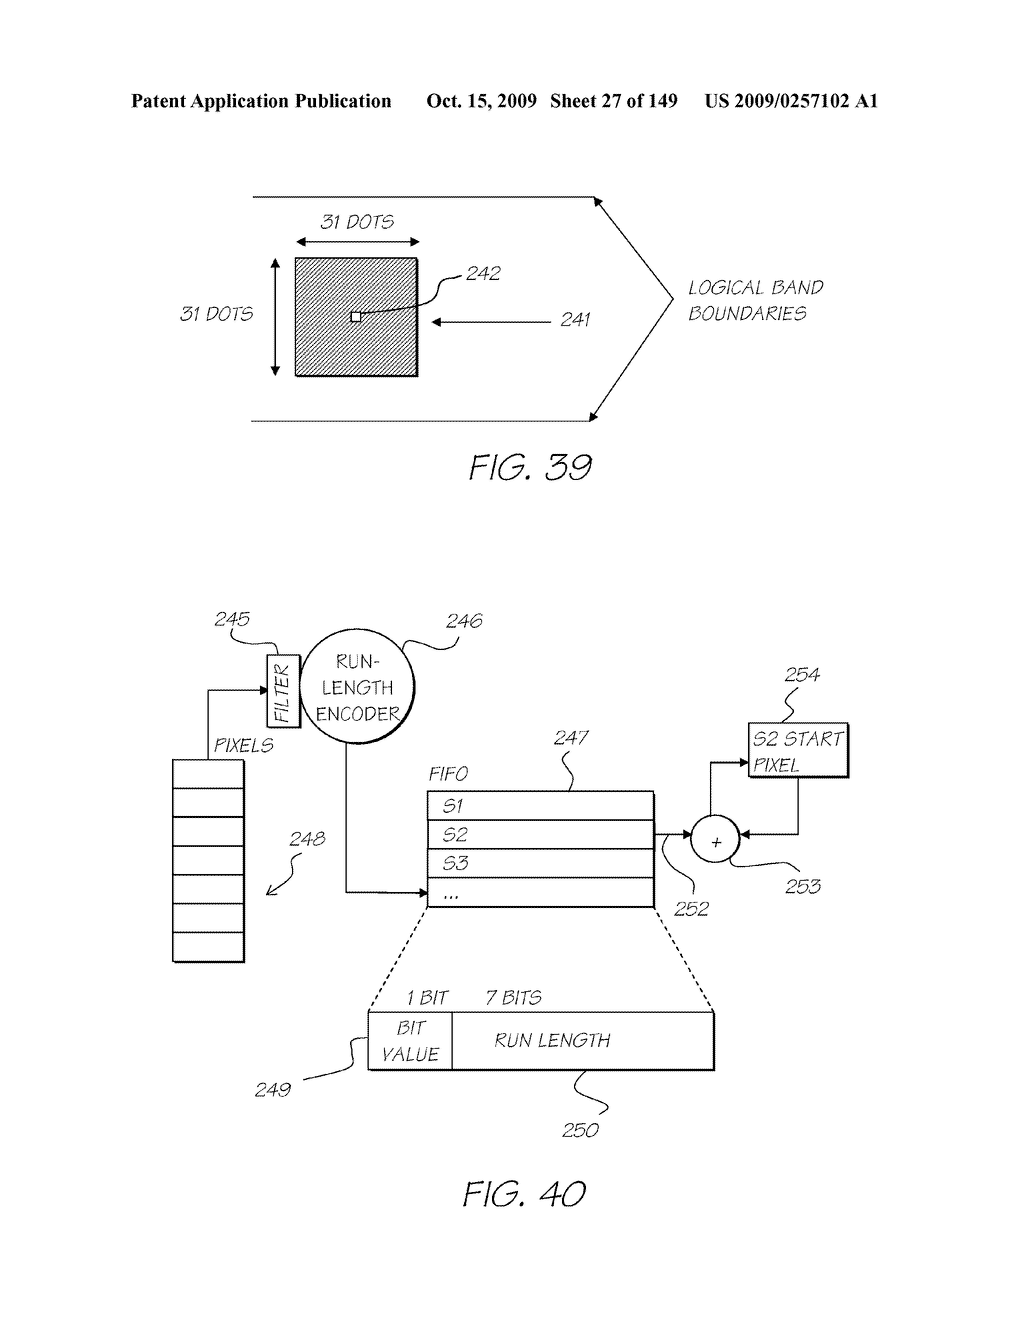 IMAGE PROCESSING APPARATUS HAVING CARD READER FOR APPLYING EFFECTS STORED ON A CARD TO A STORED IMAGE - diagram, schematic, and image 28